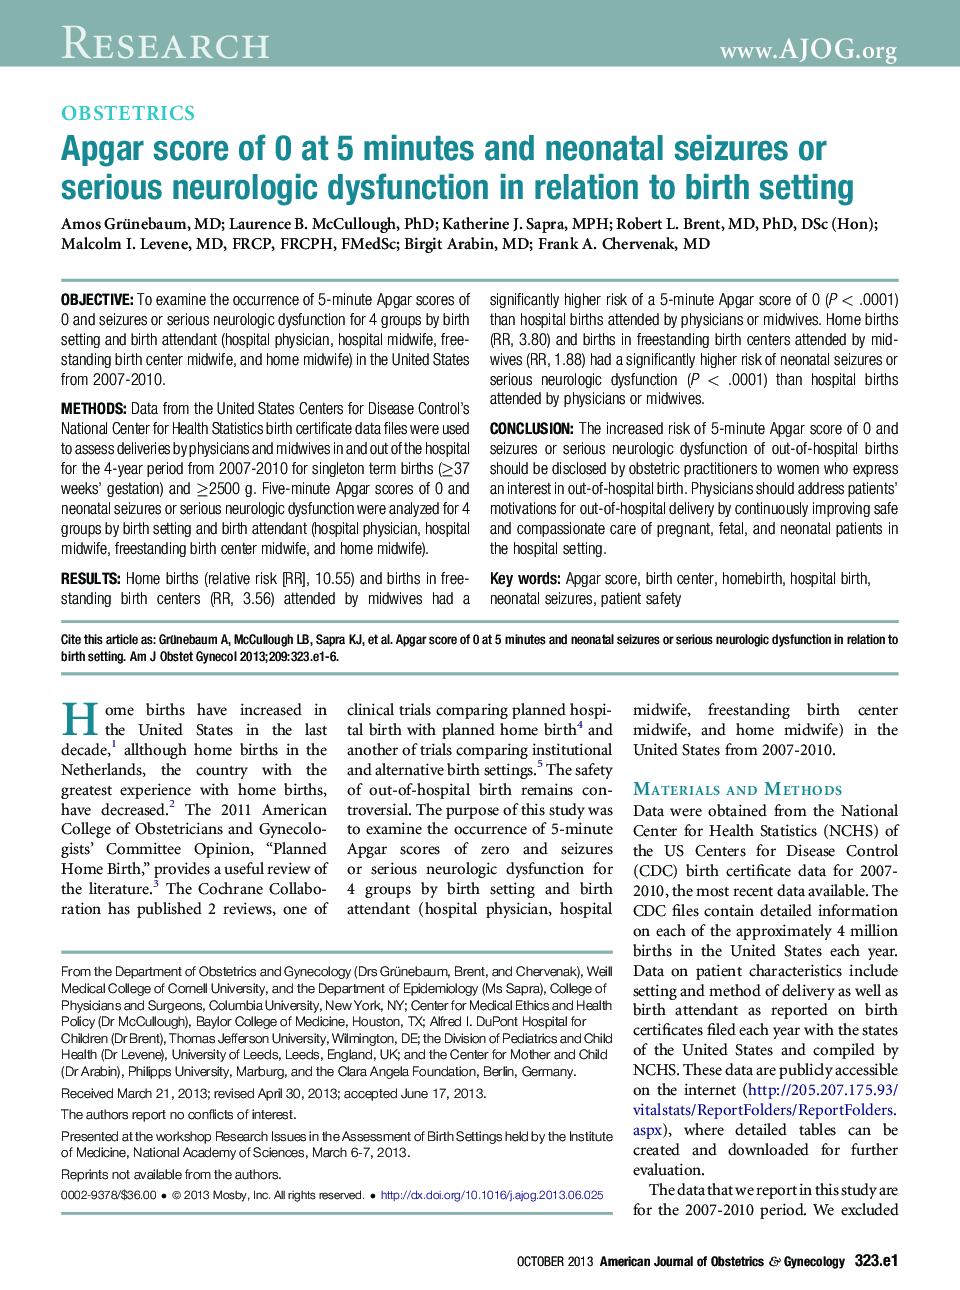 Apgar score of 0 at 5 minutes and neonatal seizures or serious neurologic dysfunction in relation to birth setting